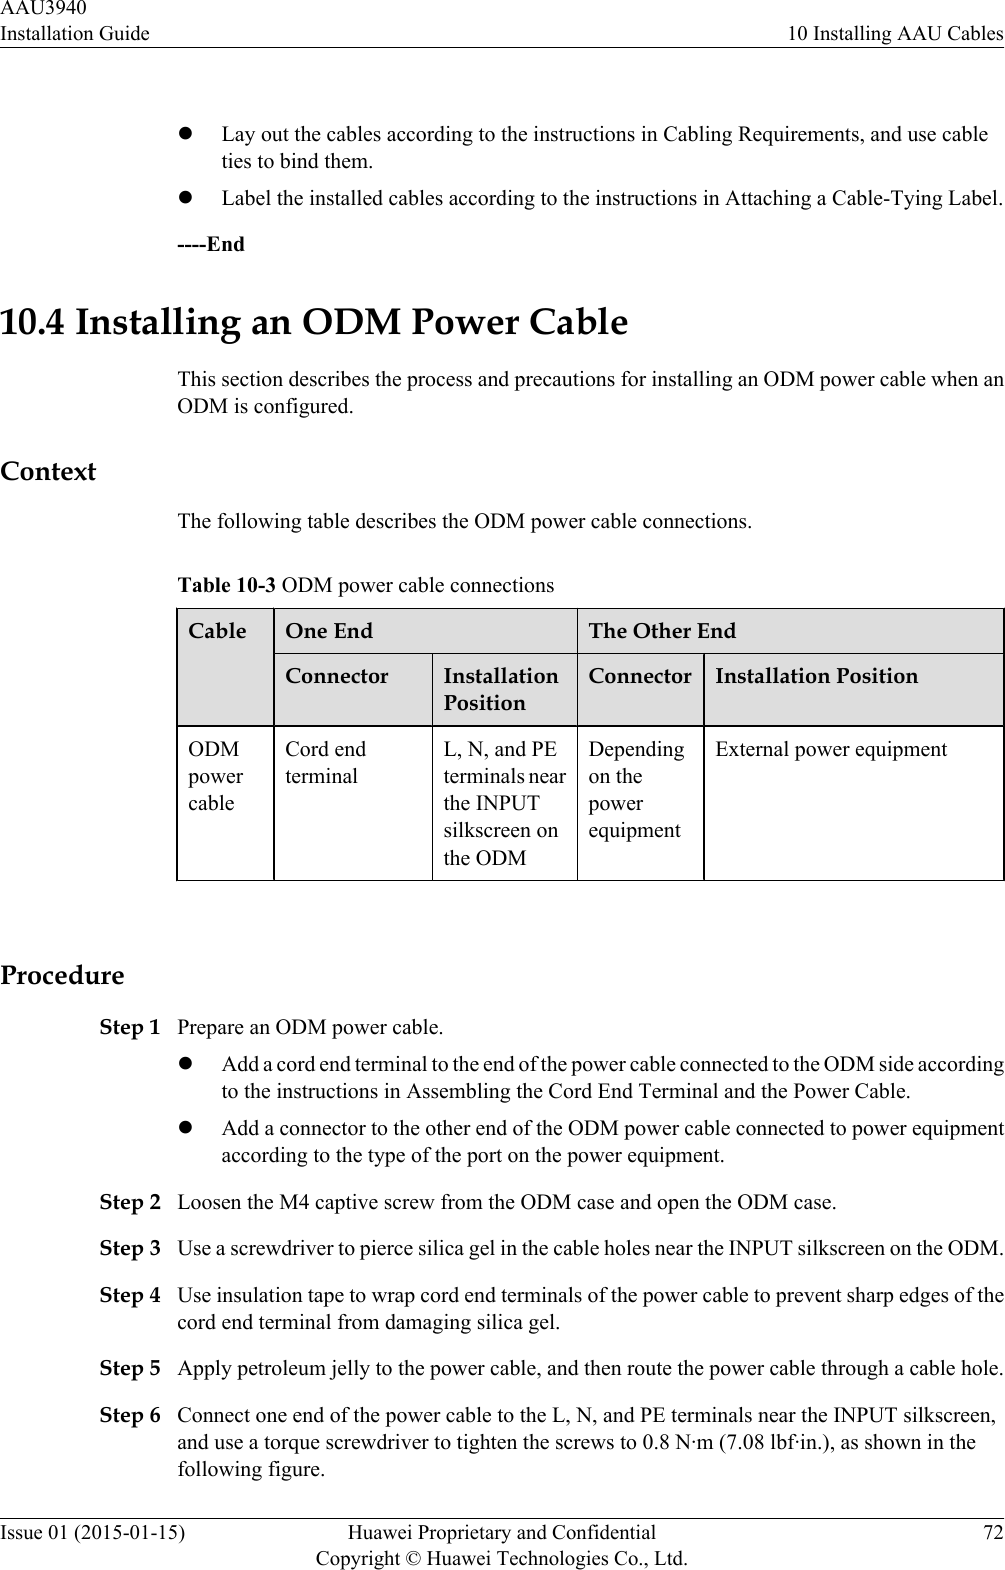  lLay out the cables according to the instructions in Cabling Requirements, and use cableties to bind them.lLabel the installed cables according to the instructions in Attaching a Cable-Tying Label.----End10.4 Installing an ODM Power CableThis section describes the process and precautions for installing an ODM power cable when anODM is configured.ContextThe following table describes the ODM power cable connections.Table 10-3 ODM power cable connectionsCable One End The Other EndConnector InstallationPositionConnector Installation PositionODMpowercableCord endterminalL, N, and PEterminals nearthe INPUTsilkscreen onthe ODMDependingon thepowerequipmentExternal power equipment ProcedureStep 1 Prepare an ODM power cable.lAdd a cord end terminal to the end of the power cable connected to the ODM side accordingto the instructions in Assembling the Cord End Terminal and the Power Cable.lAdd a connector to the other end of the ODM power cable connected to power equipmentaccording to the type of the port on the power equipment.Step 2 Loosen the M4 captive screw from the ODM case and open the ODM case.Step 3 Use a screwdriver to pierce silica gel in the cable holes near the INPUT silkscreen on the ODM.Step 4 Use insulation tape to wrap cord end terminals of the power cable to prevent sharp edges of thecord end terminal from damaging silica gel.Step 5 Apply petroleum jelly to the power cable, and then route the power cable through a cable hole.Step 6 Connect one end of the power cable to the L, N, and PE terminals near the INPUT silkscreen,and use a torque screwdriver to tighten the screws to 0.8 N·m (7.08 lbf·in.), as shown in thefollowing figure.AAU3940Installation Guide 10 Installing AAU CablesIssue 01 (2015-01-15) Huawei Proprietary and ConfidentialCopyright © Huawei Technologies Co., Ltd.72